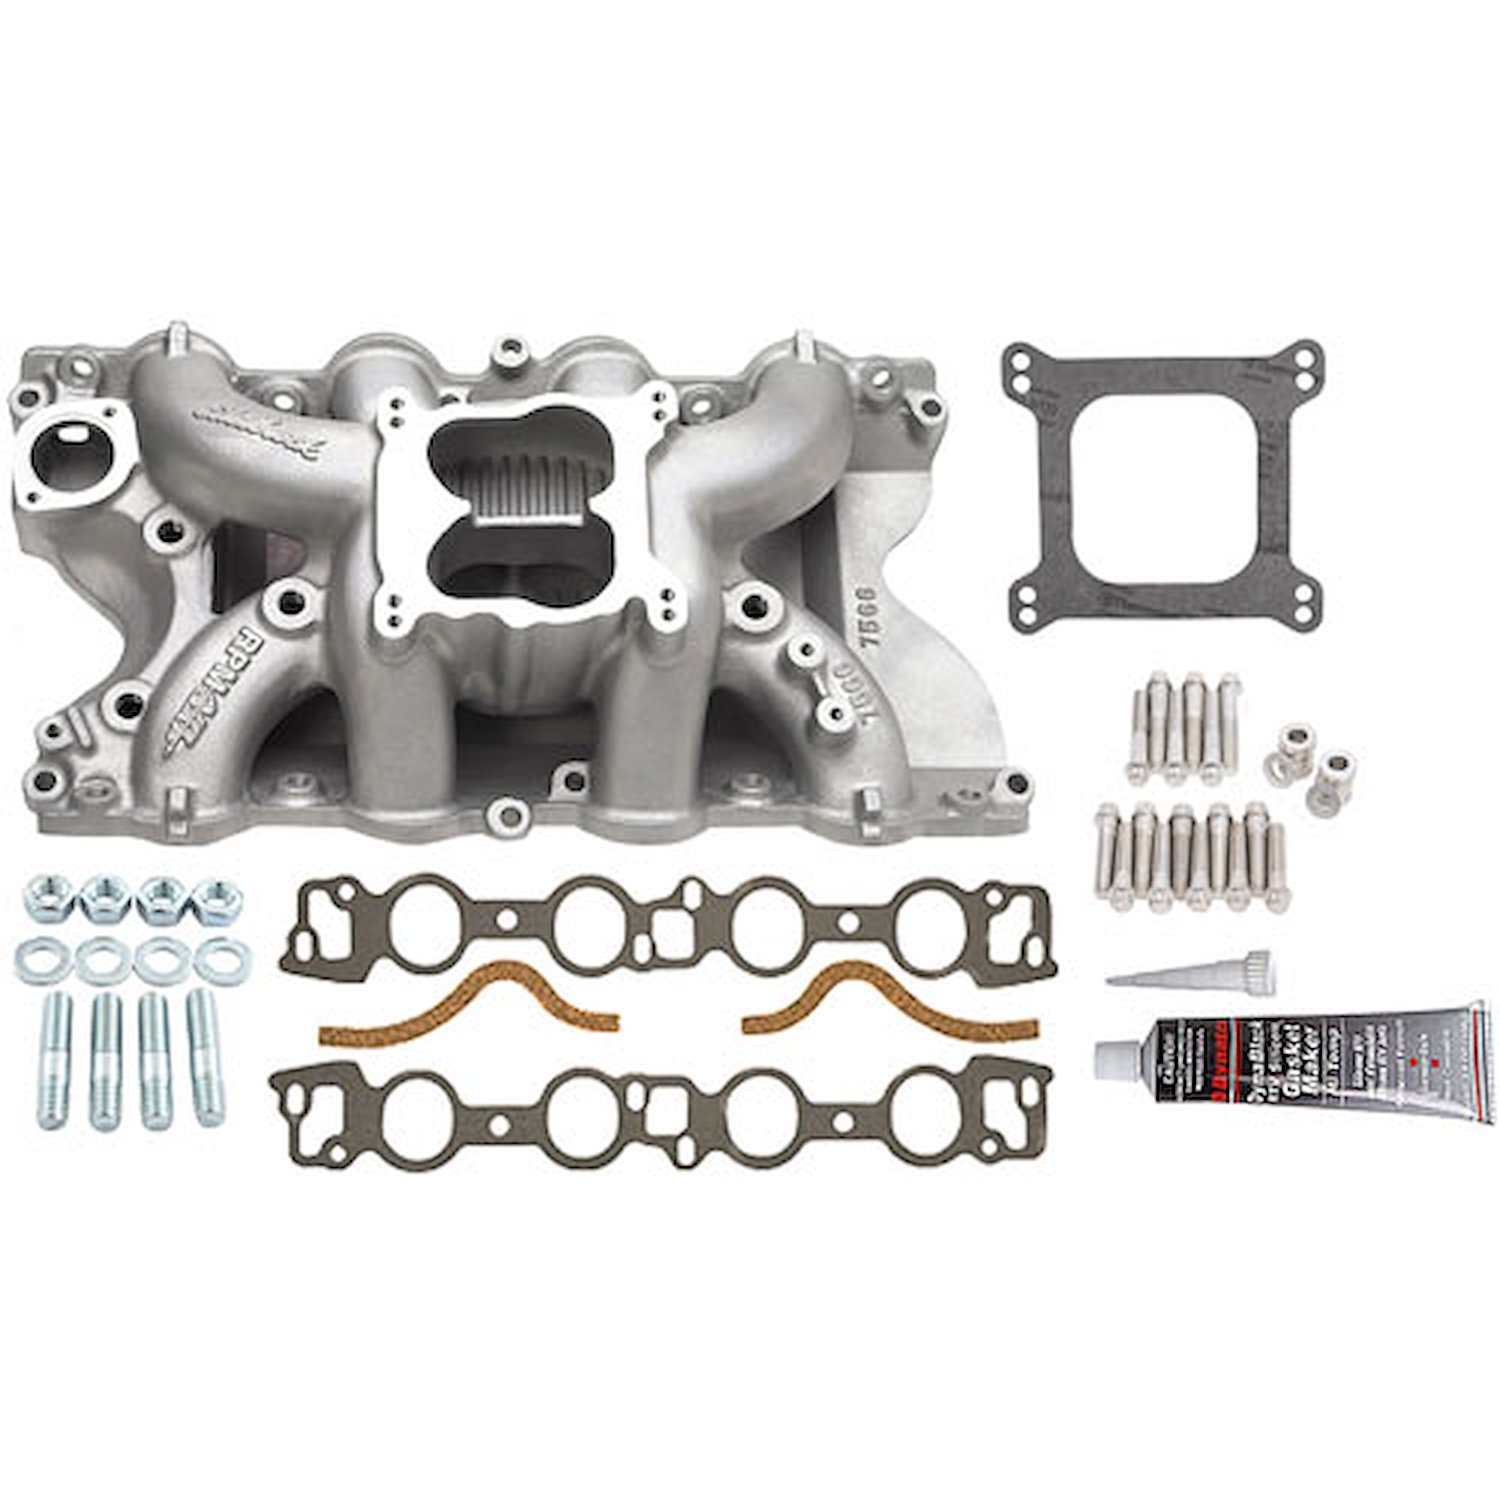 Edelbrock 7566K: RPM Air-Gap 460 Ford Intake Manifold with Installation Kit  - JEGS High Performance